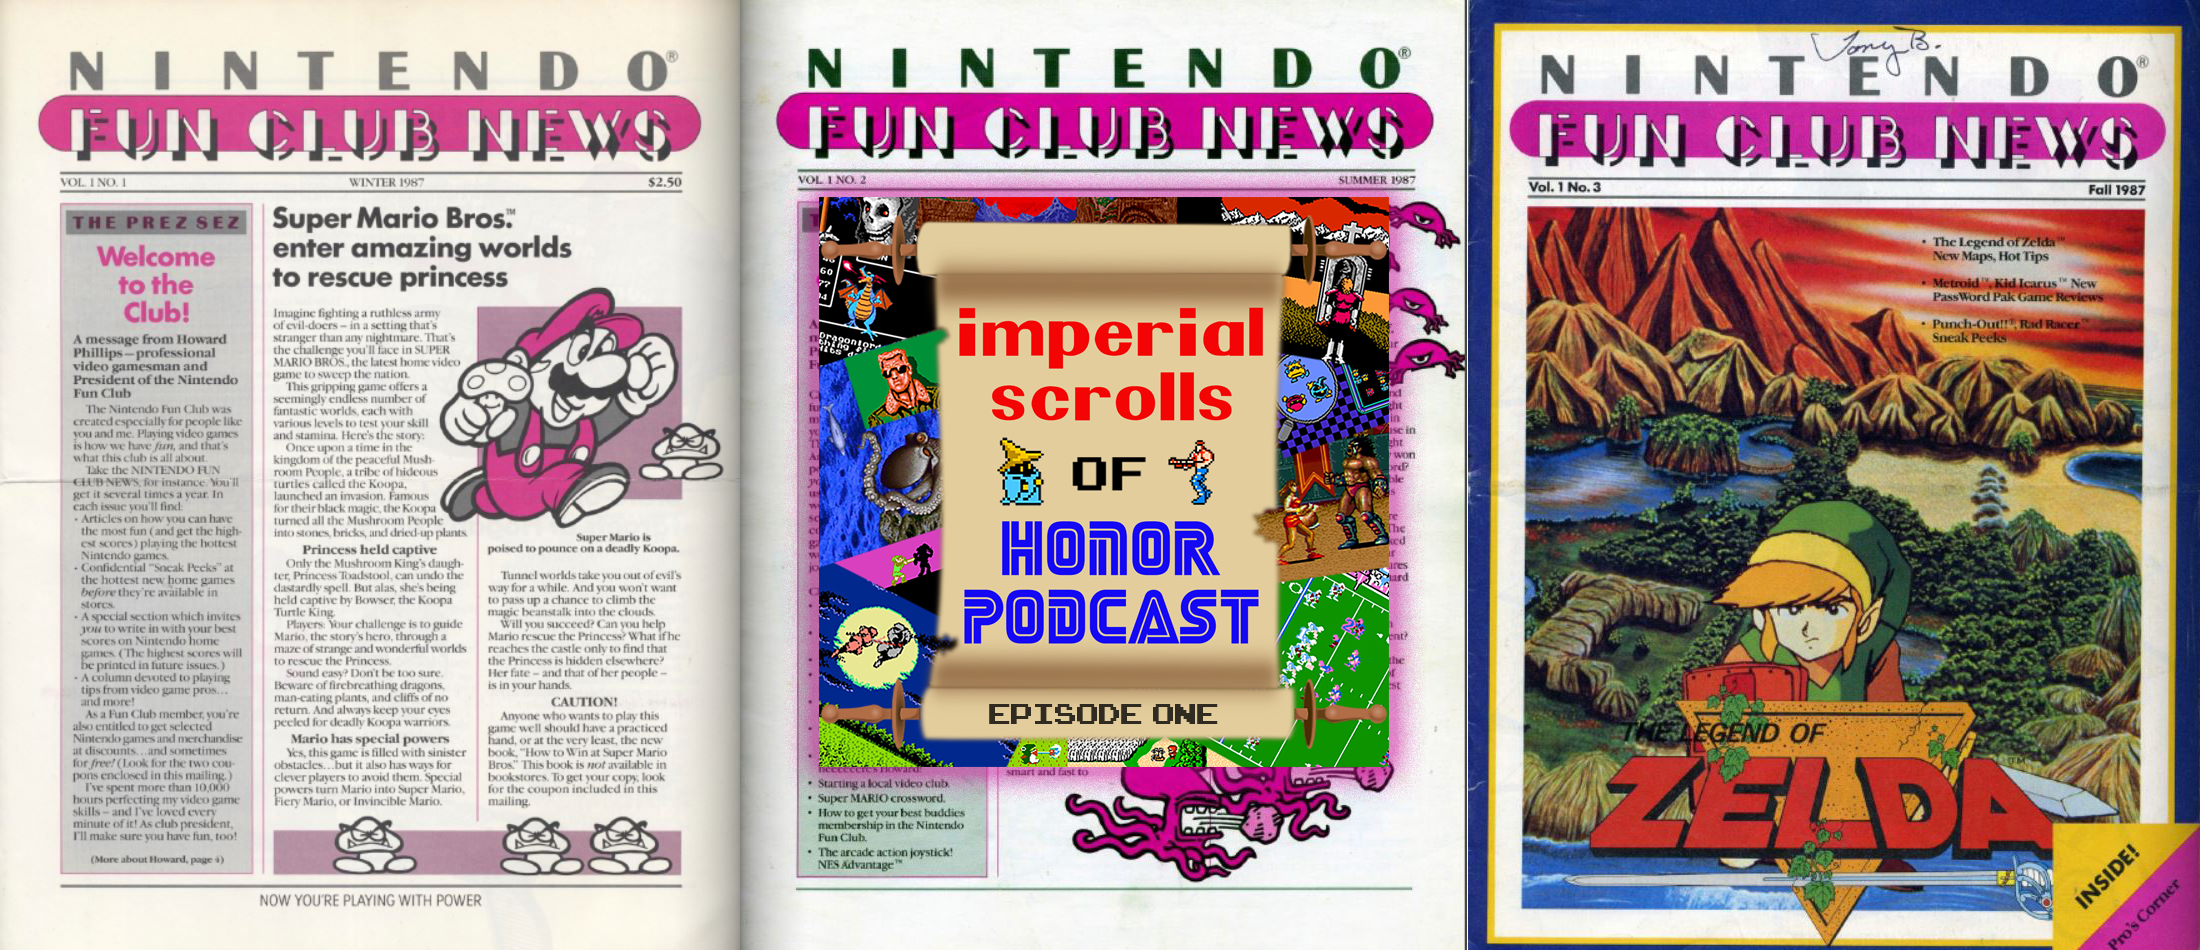 Imperial Scrolls of Honor Podcast - Episode 1 - Nintendo Fun Club News #1-3